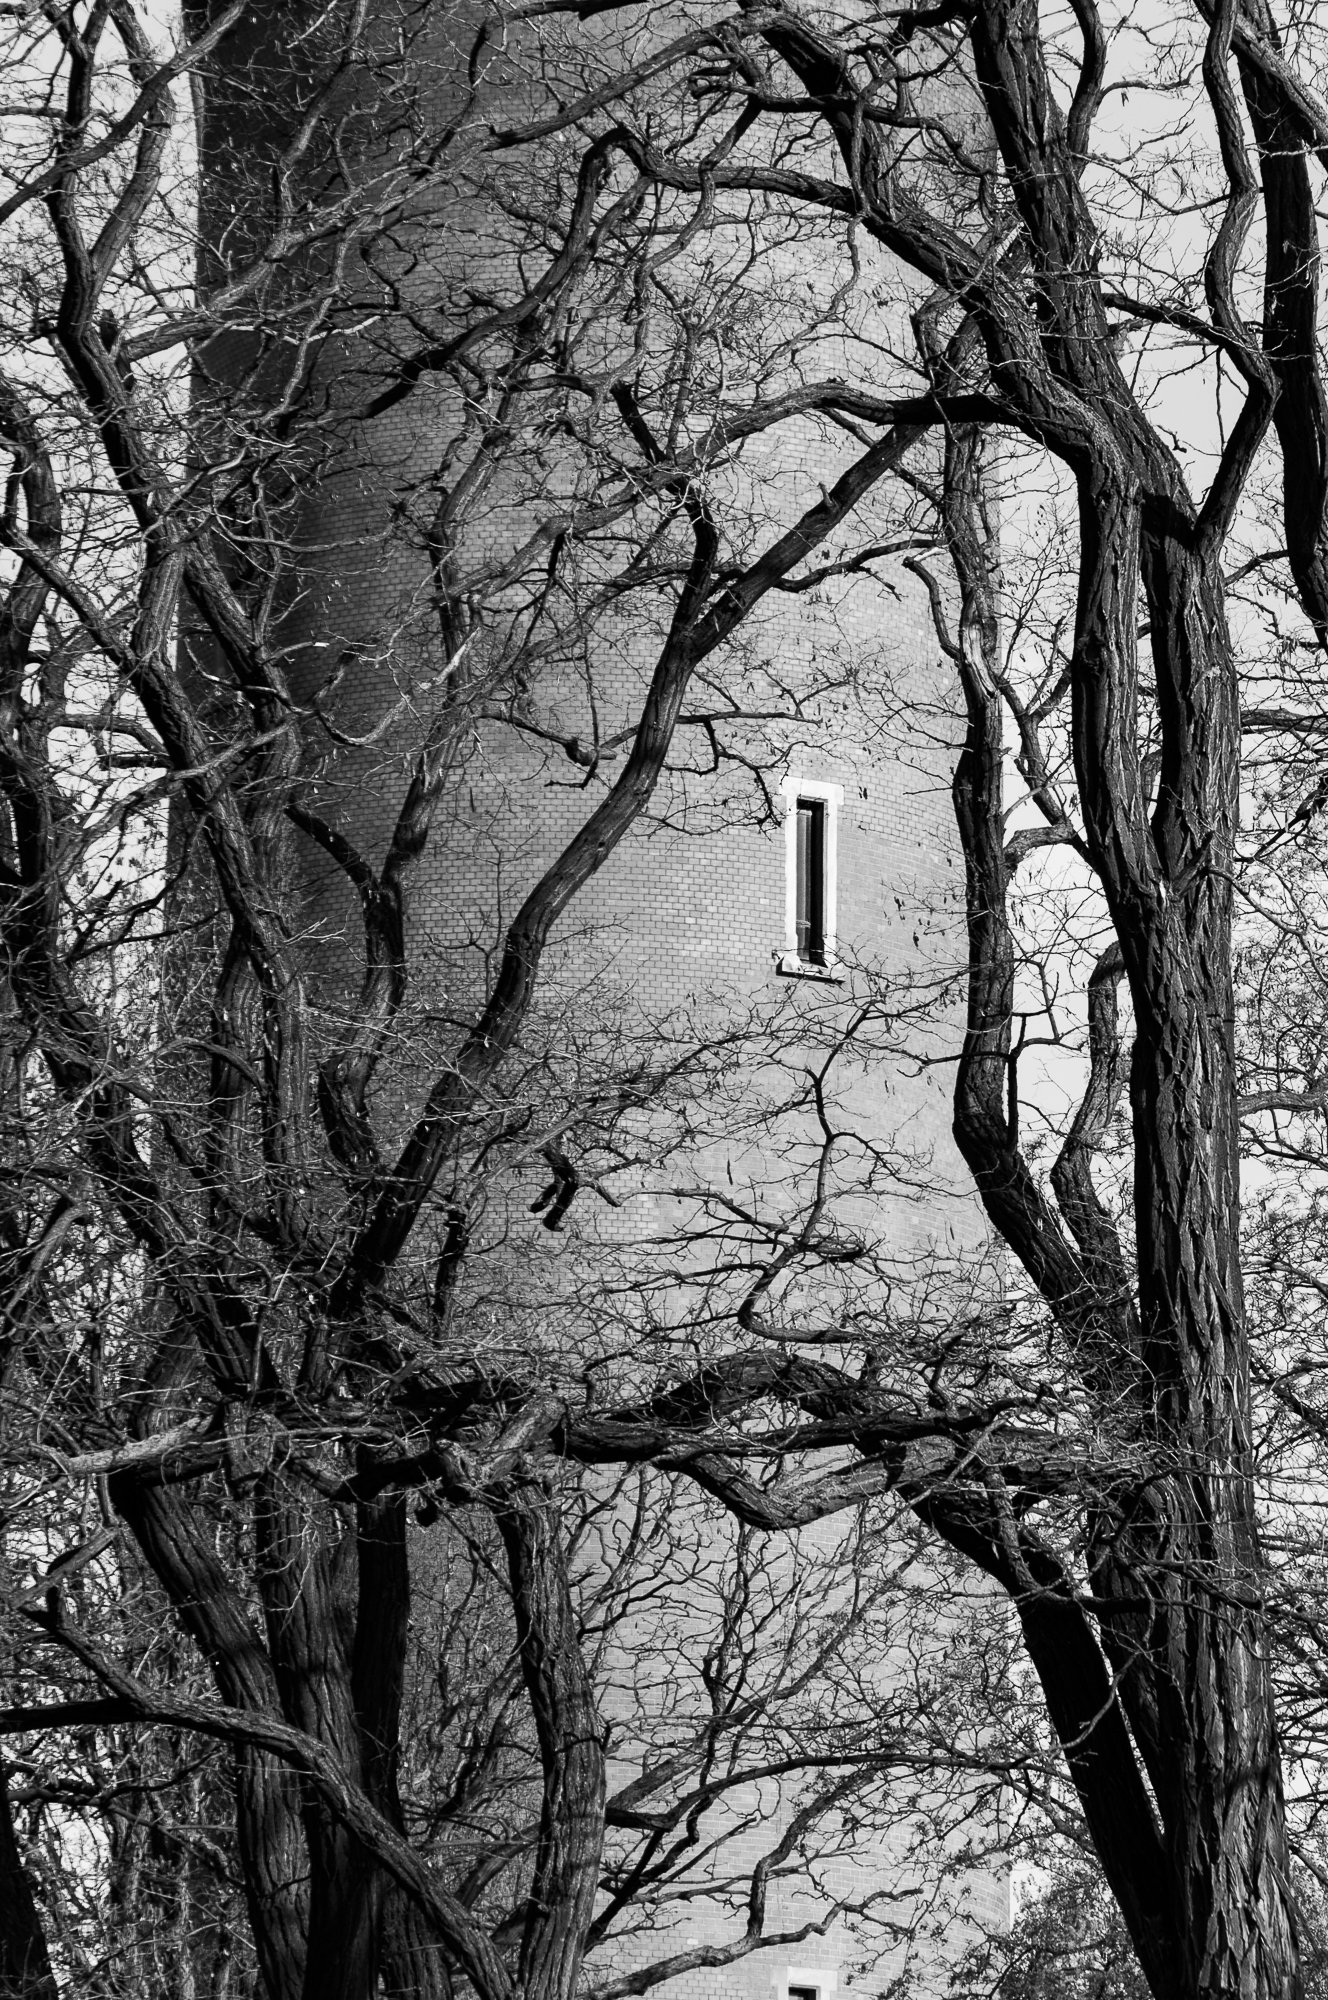 Adam Mazek Photography Warsaw 2017. Minimalism. Lonely window and the branches of trees. "Negation of the End." Inspired by Hiroshige. "Negacja Końca"